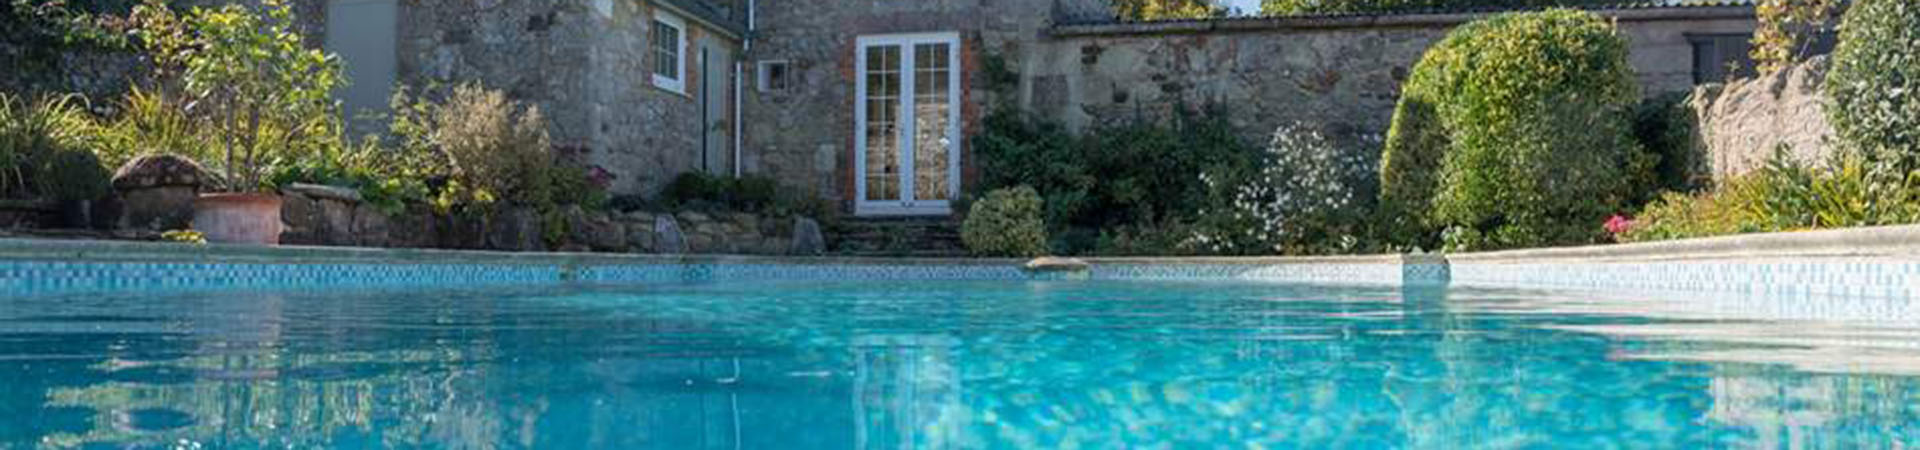 Holiday cottages with pools in Wiltshire